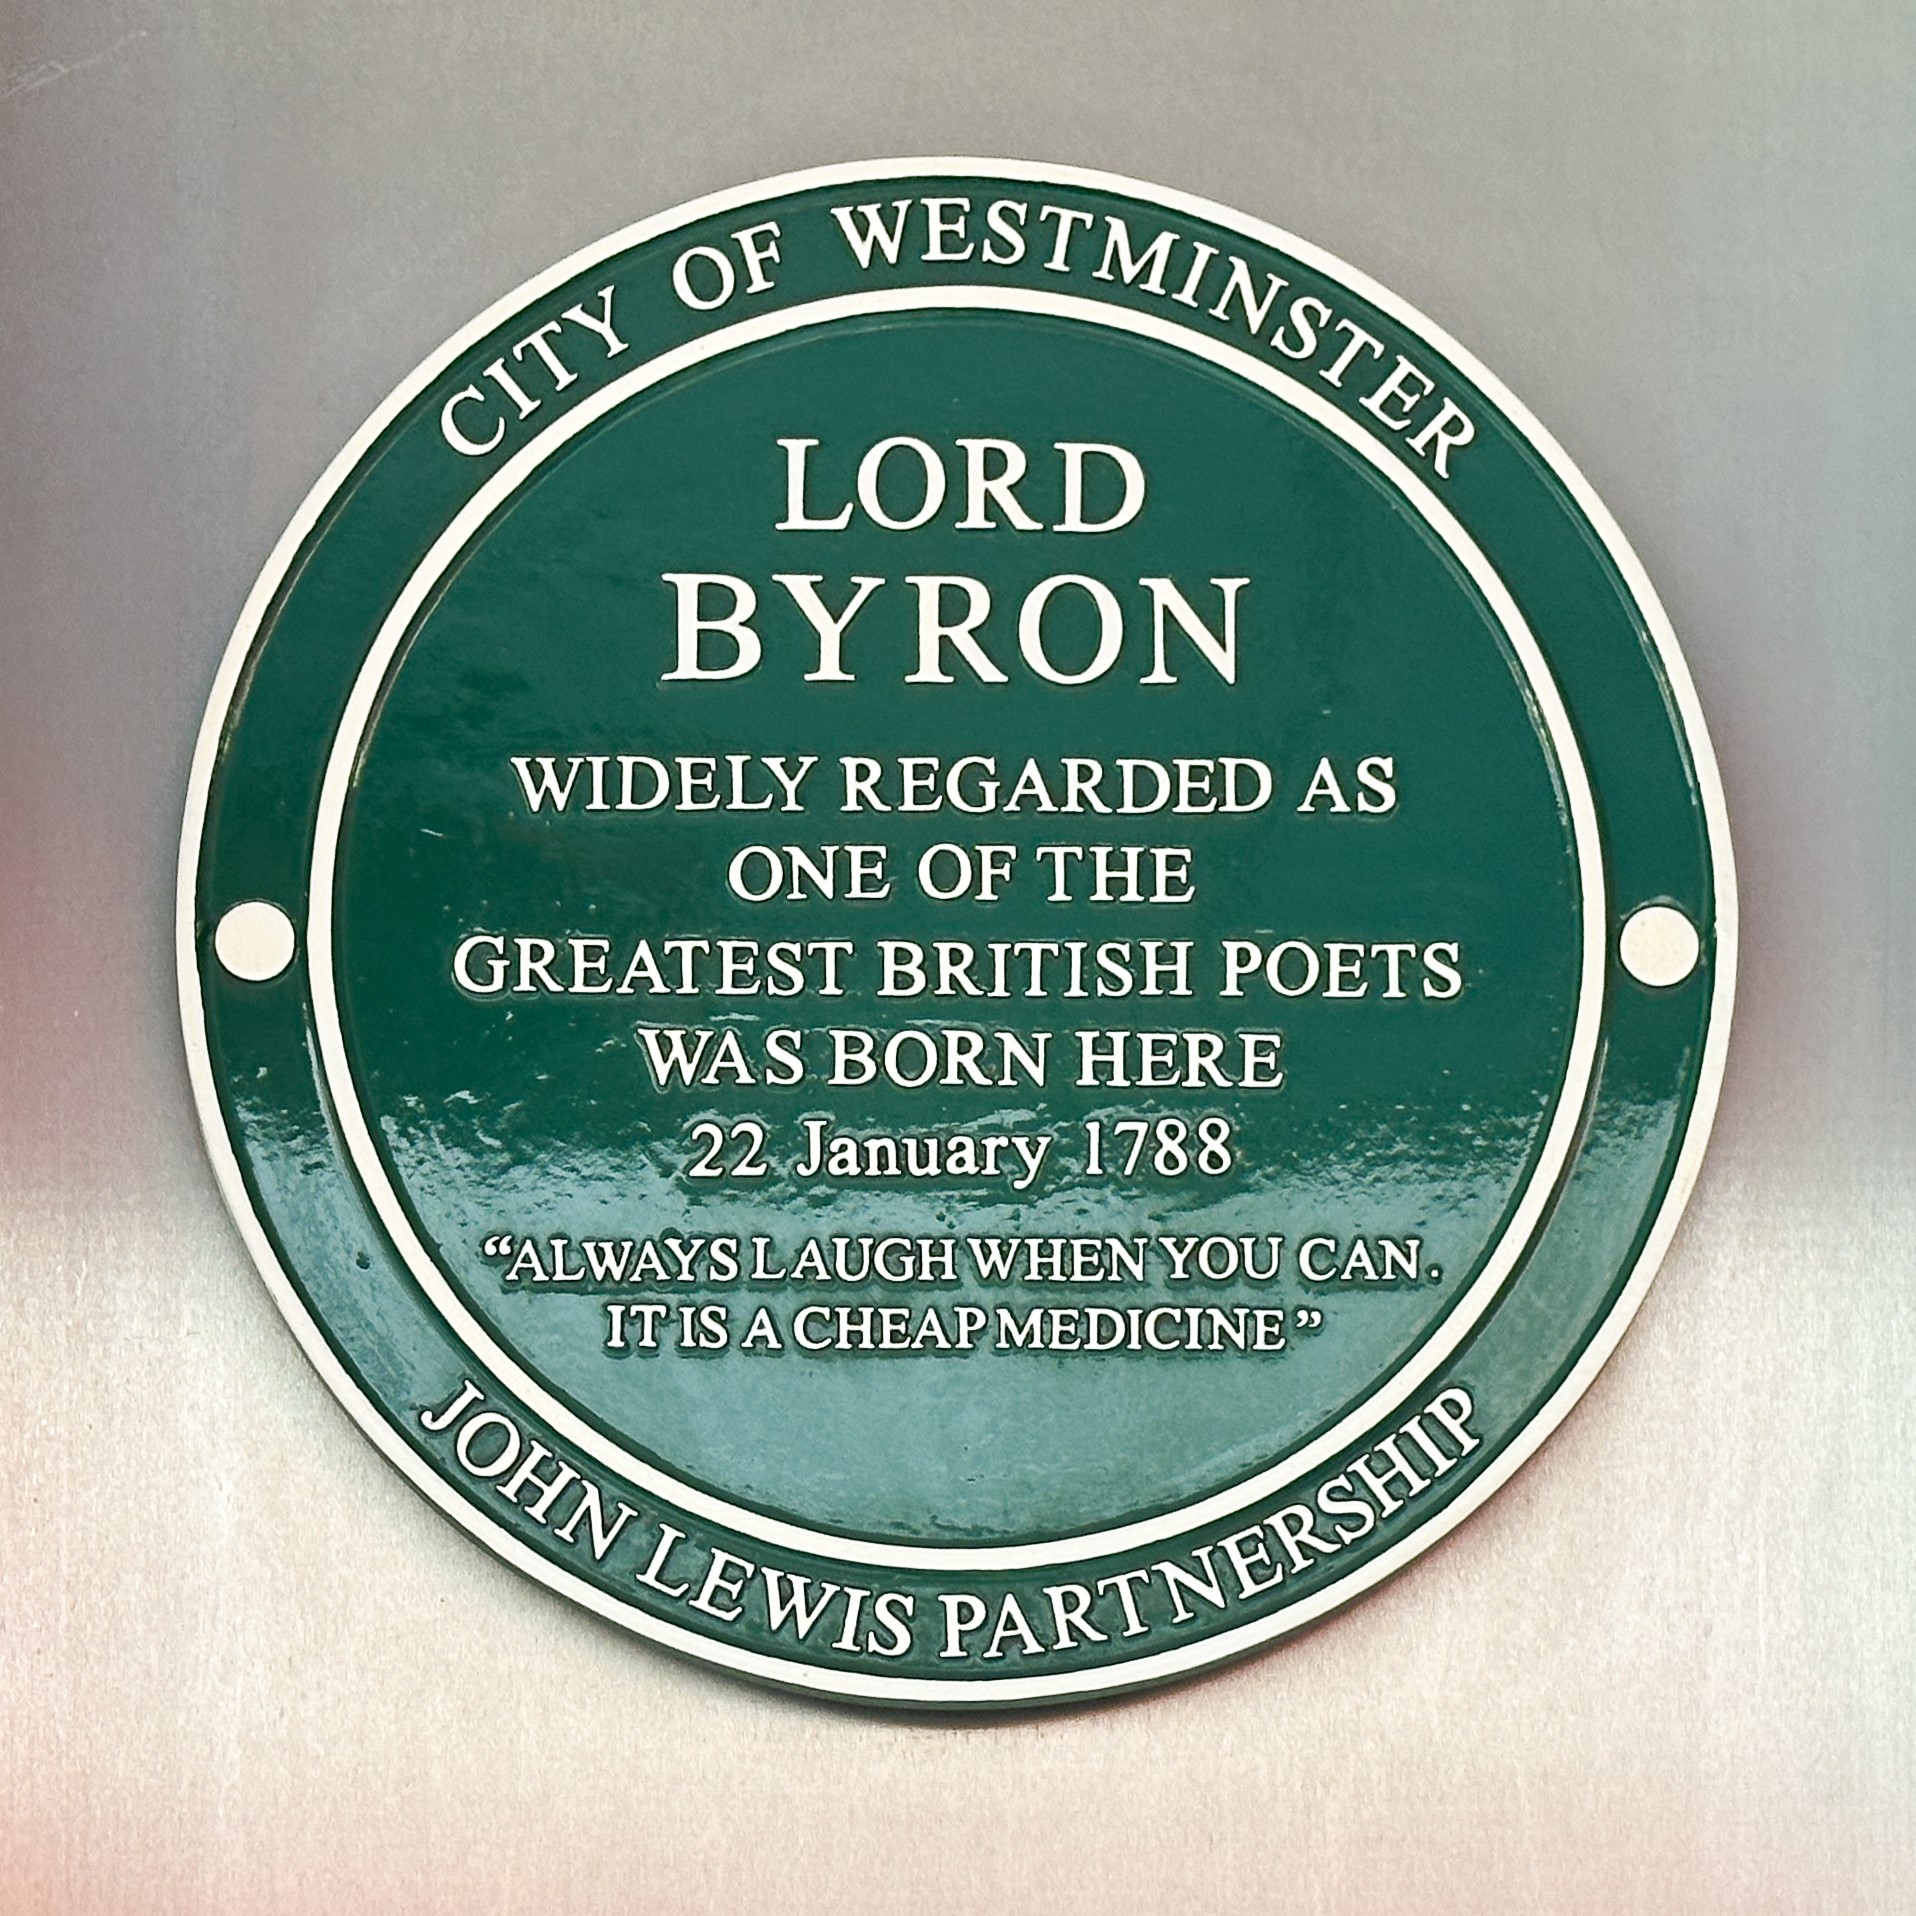 Commemorating Lord Byron on the streets of London